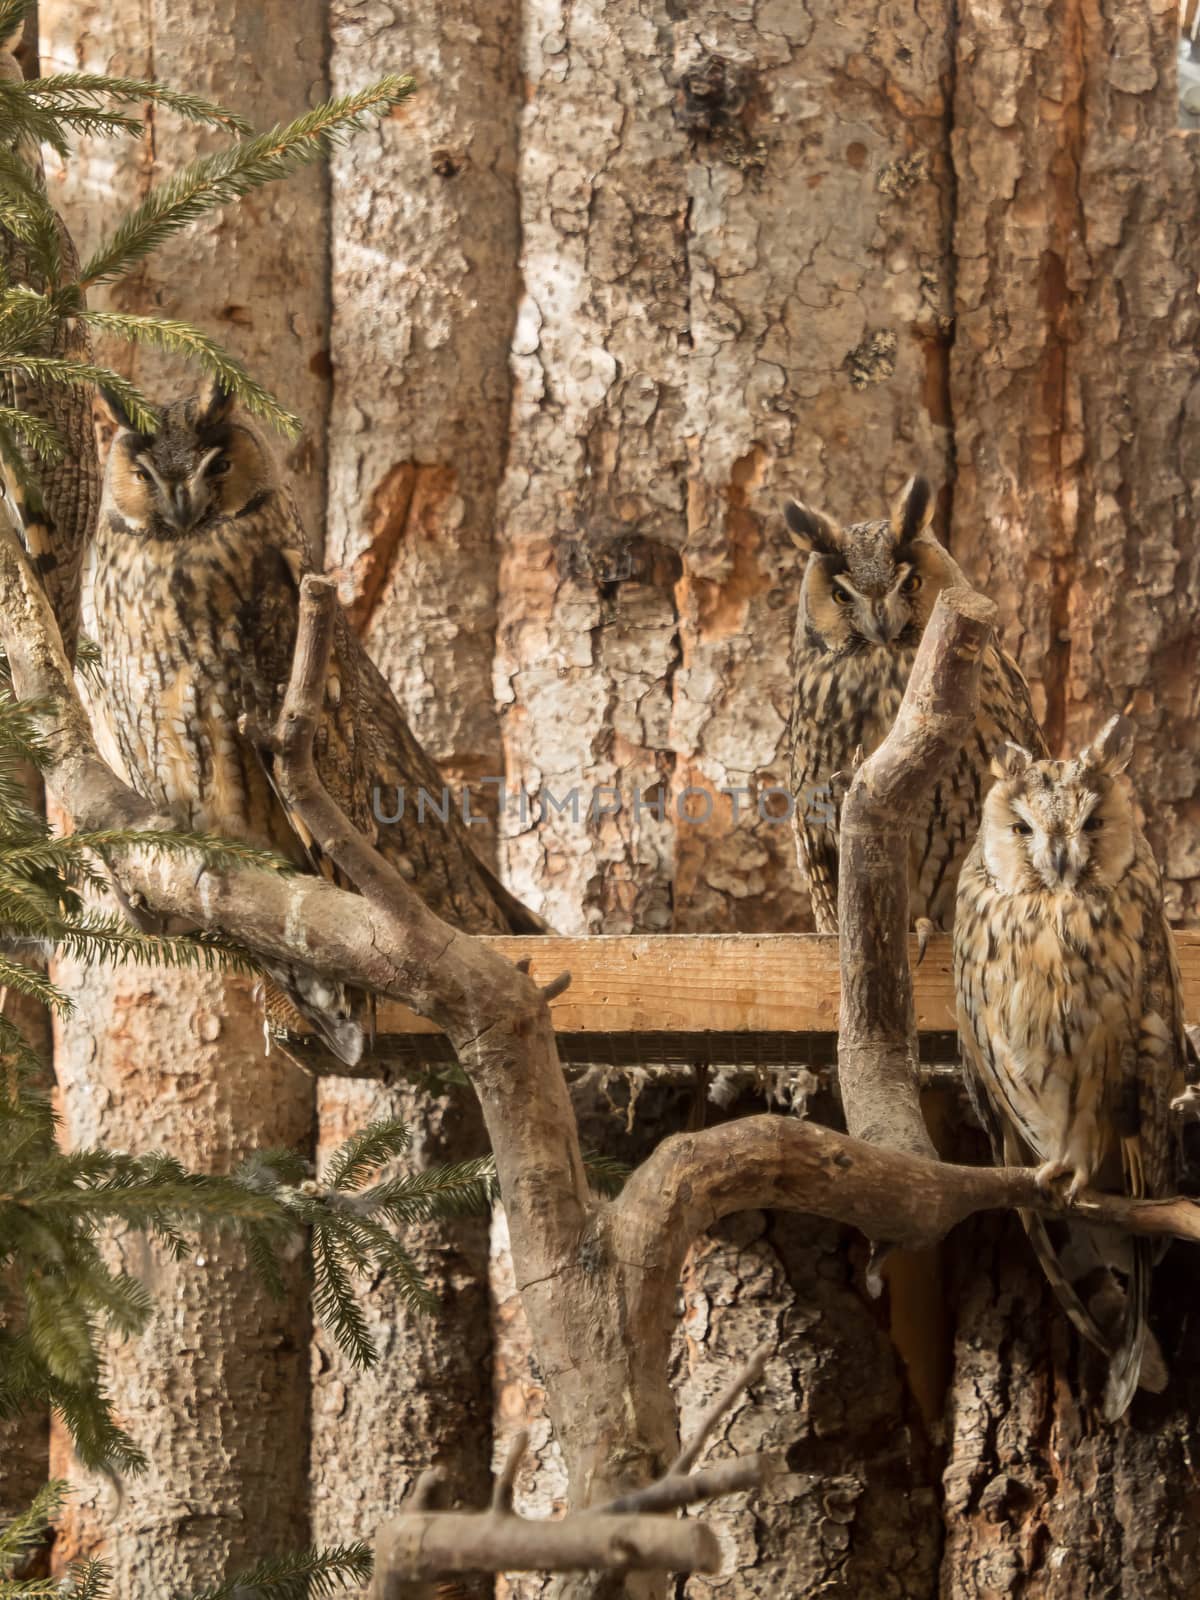 Long-eared owls sit on branches